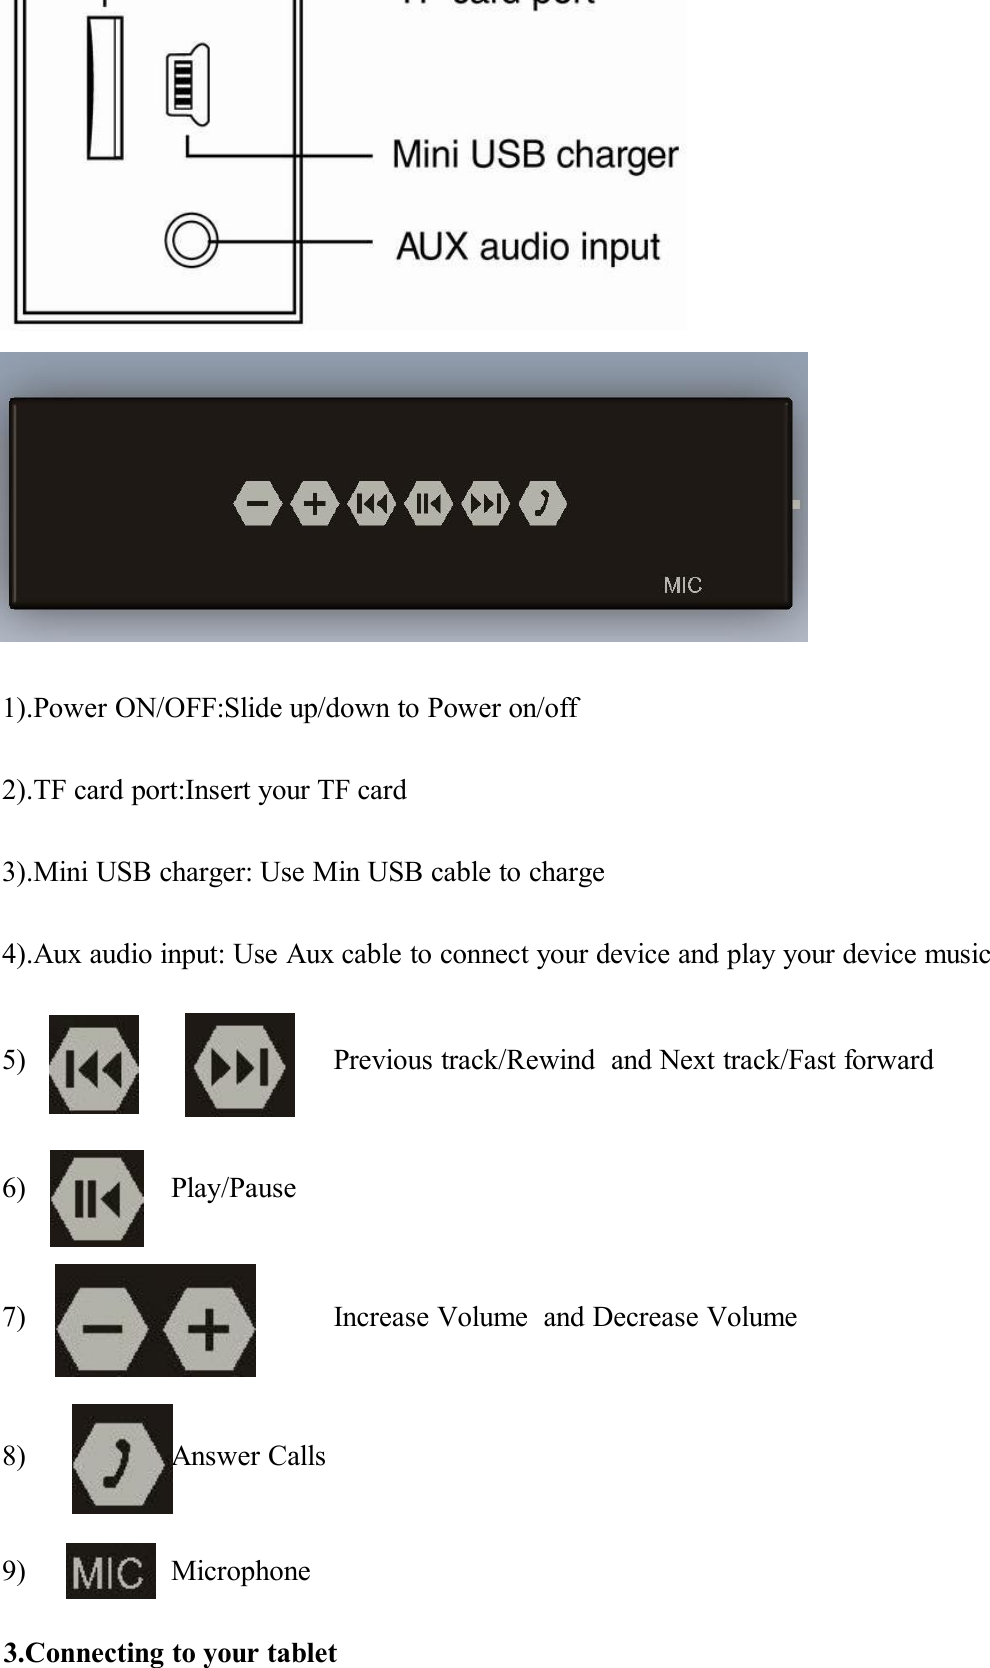 1).Power ON/OFF:Slide up/down to Power on/off2).TF card port:Insert your TF card3).Mini USB charger: Use Min USB cable to charge4).Aux audio input: Use Aux cable to connect your device and play your device music5) Previous track/Rewind  and Next track/Fast forward6) Play/Pause7) Increase Volume  and Decrease Volume8) Answer Calls9) Microphone3.Connecting to your tablet